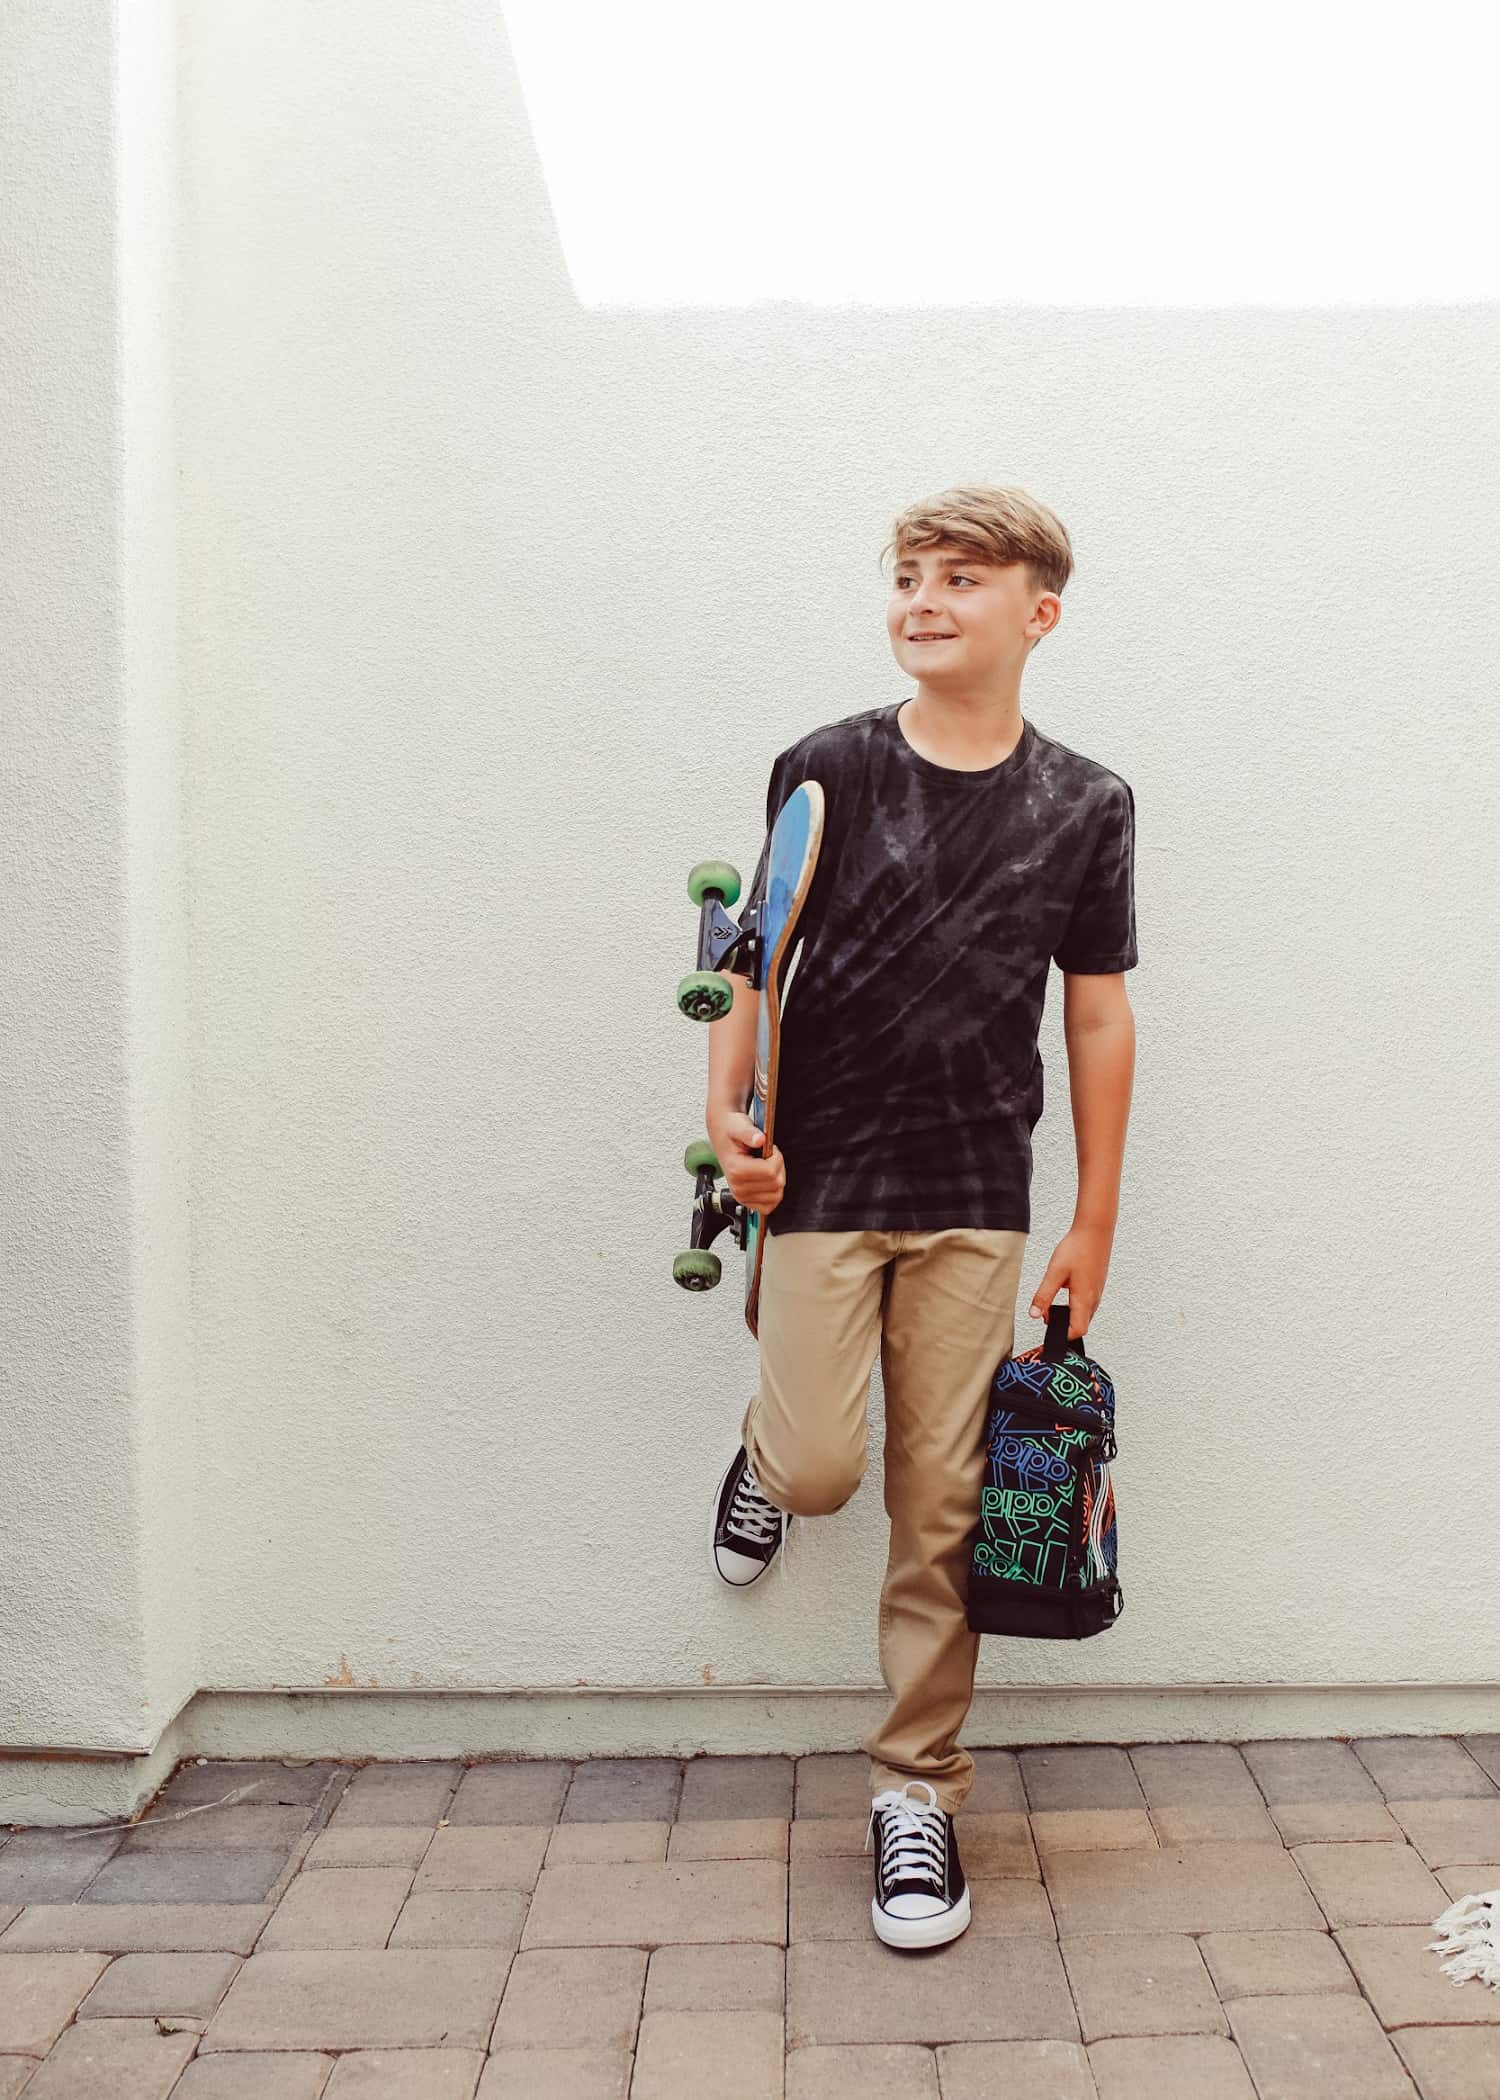 A good example of a casting profile picture. The young teenager is leaning against a wall with his head turned to one side. He's holding a backpack and a skateboard.